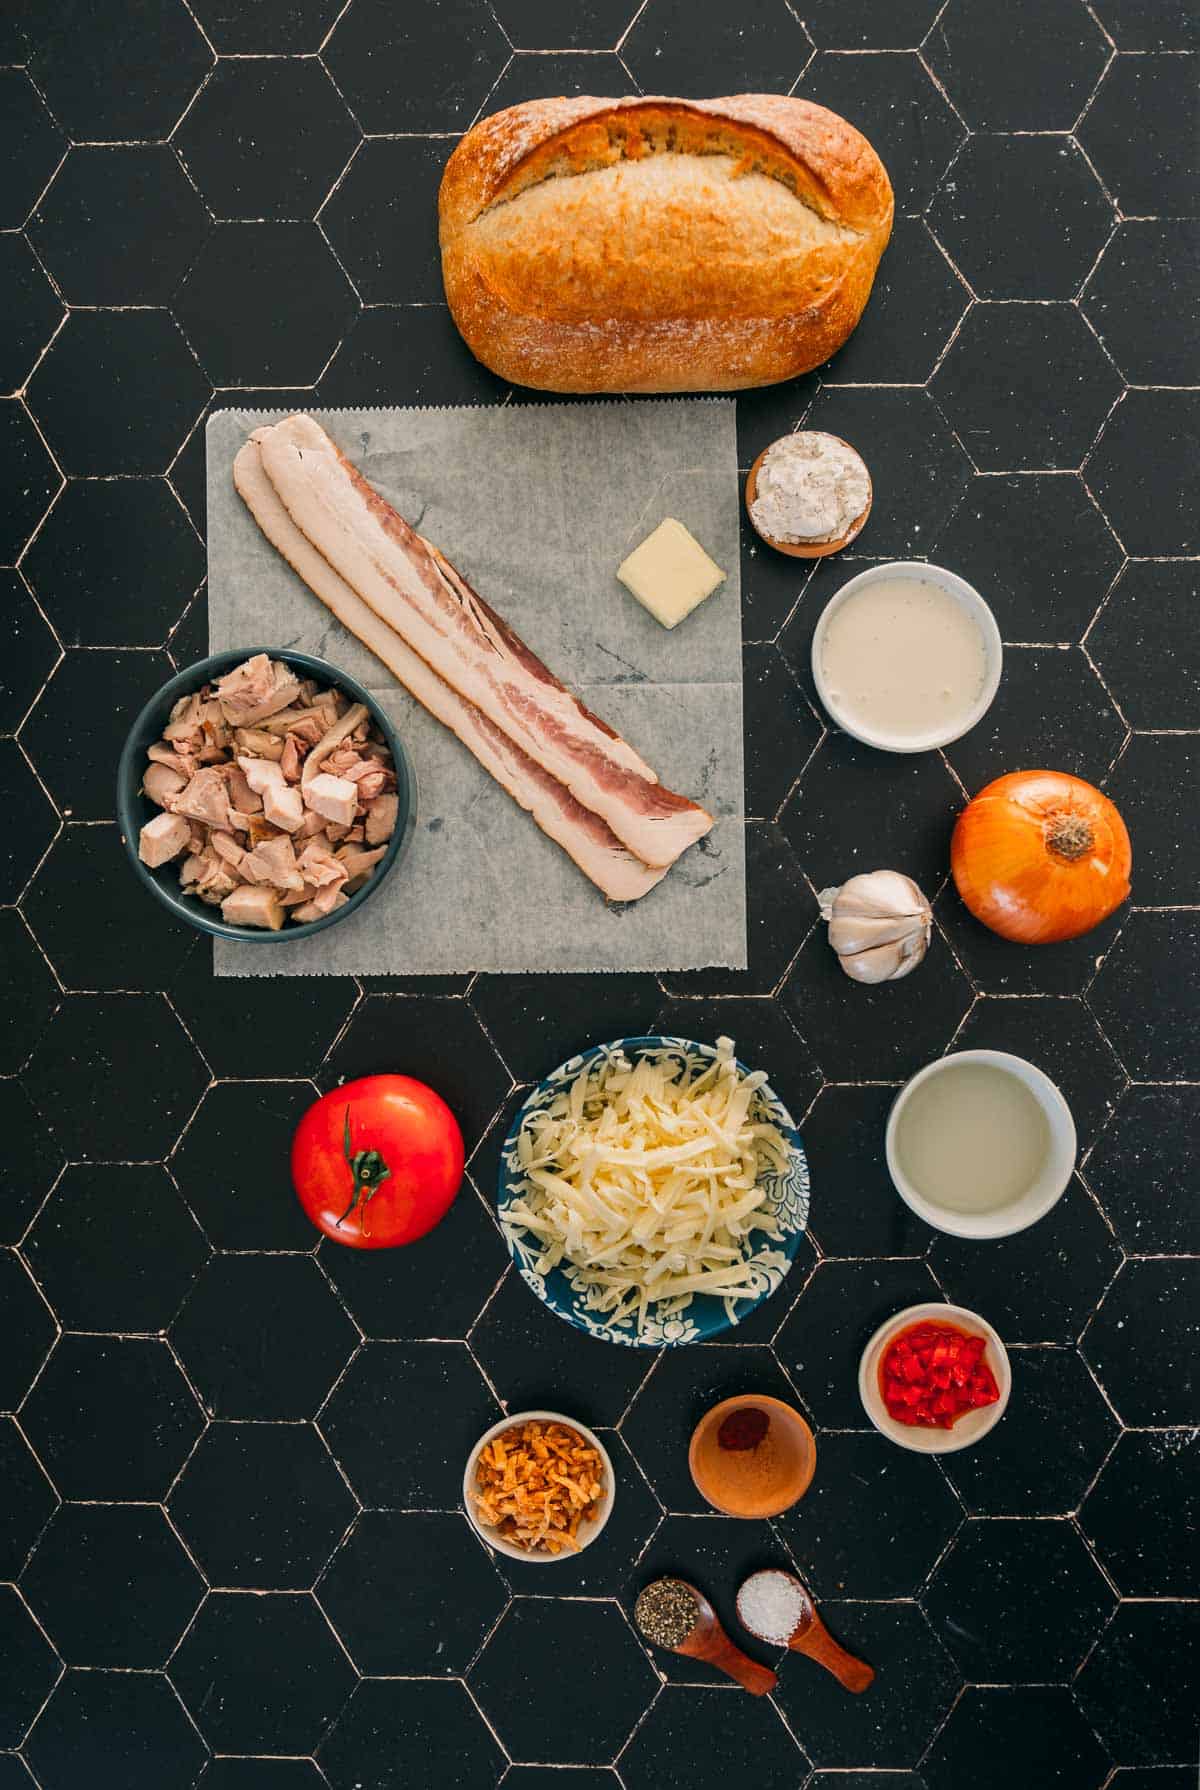 The ingredients for Kentucky hot brown sandwiches laid out on a table.